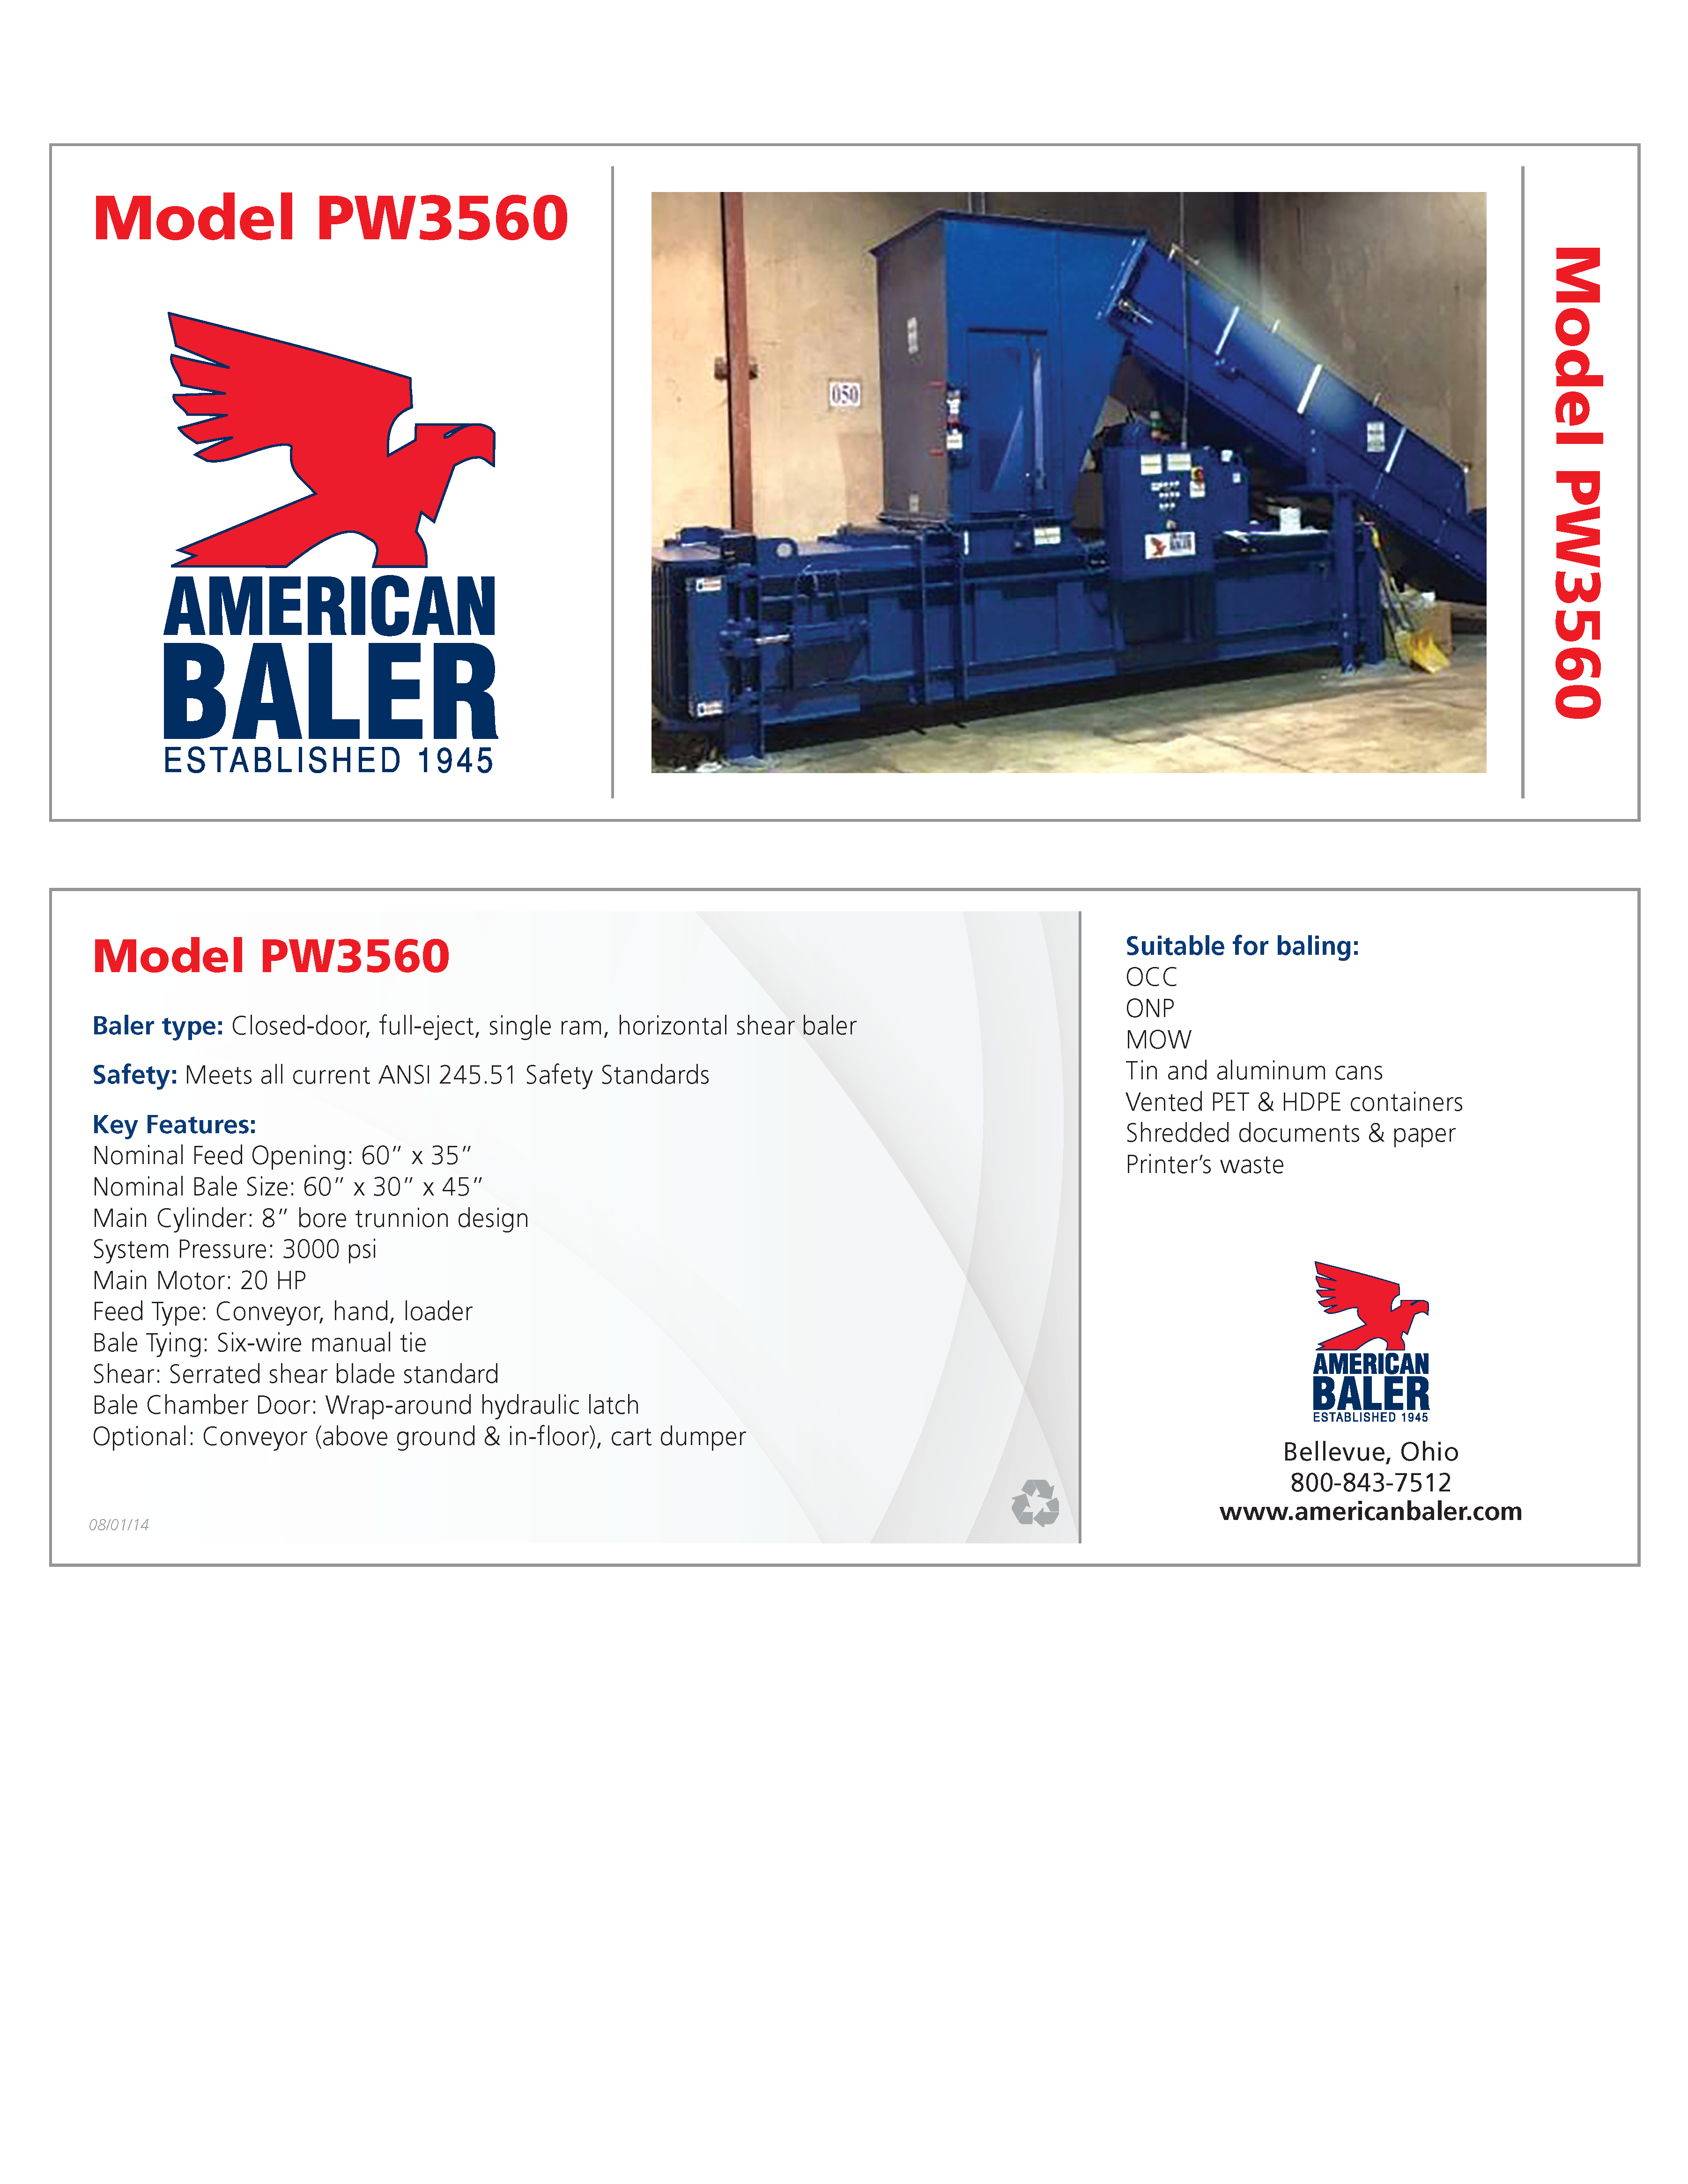 Learn more about the PW3560 Full Eject Manual-Tie Predator Baler in the American Baler Brochure